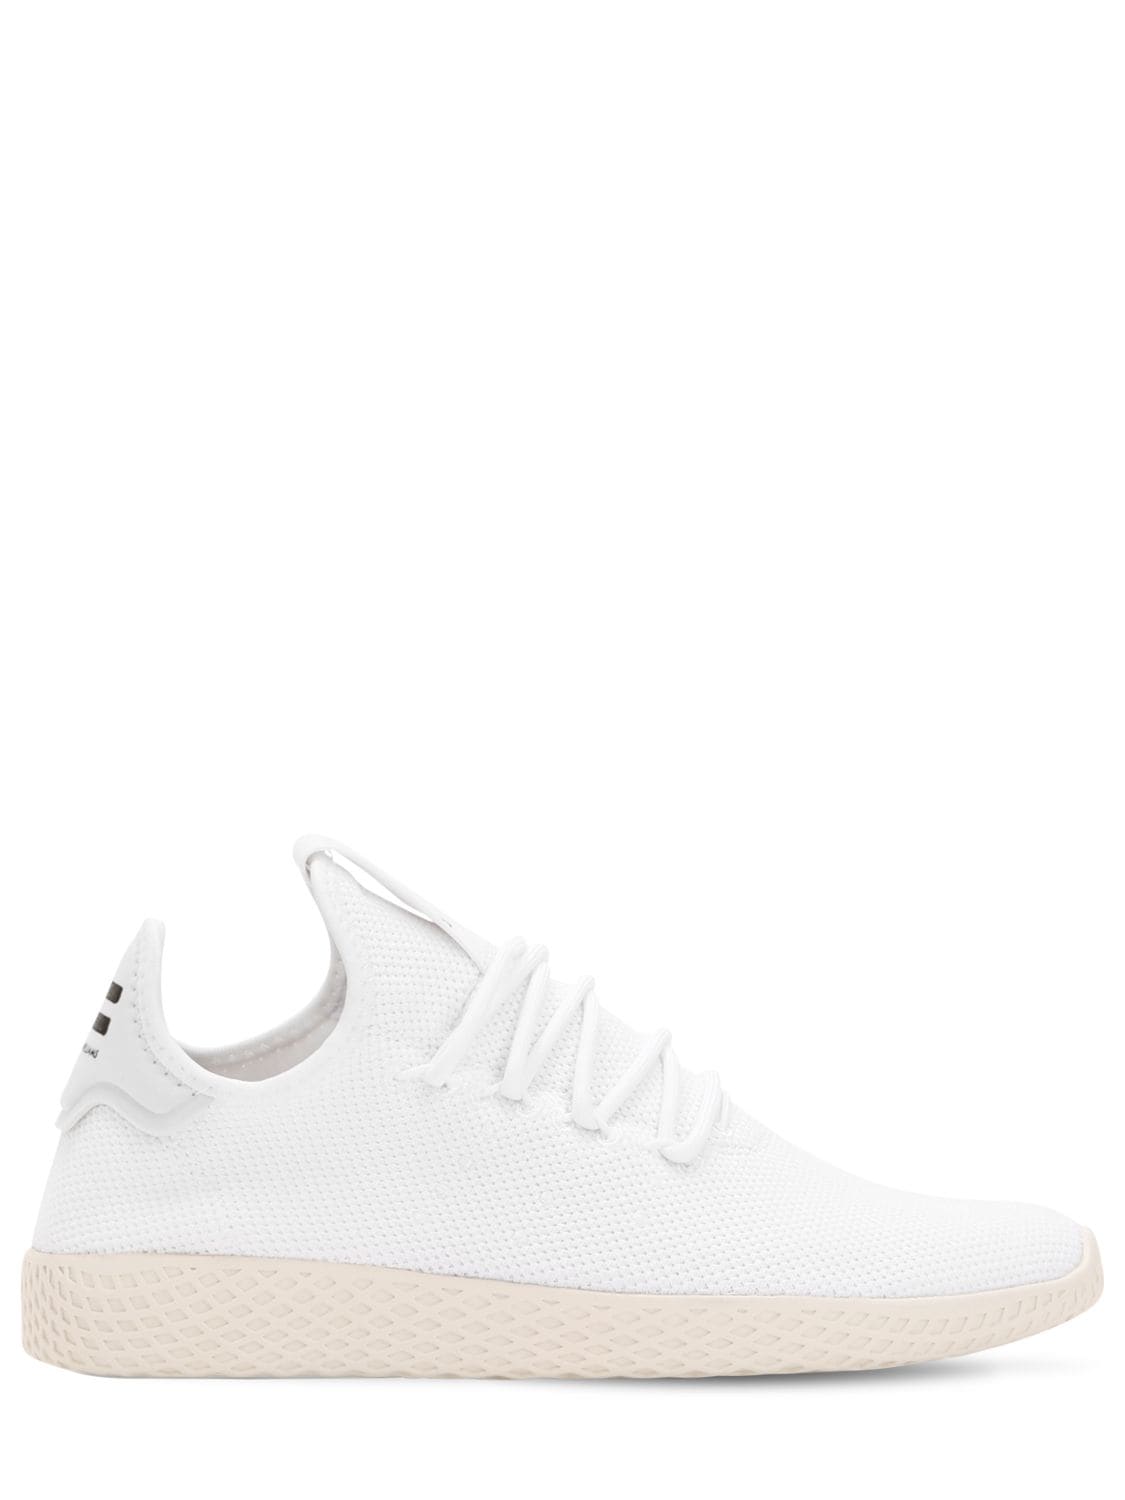 Adidas Originals By Pharrell Williams Pharrell Williams Knit Sneakers In White